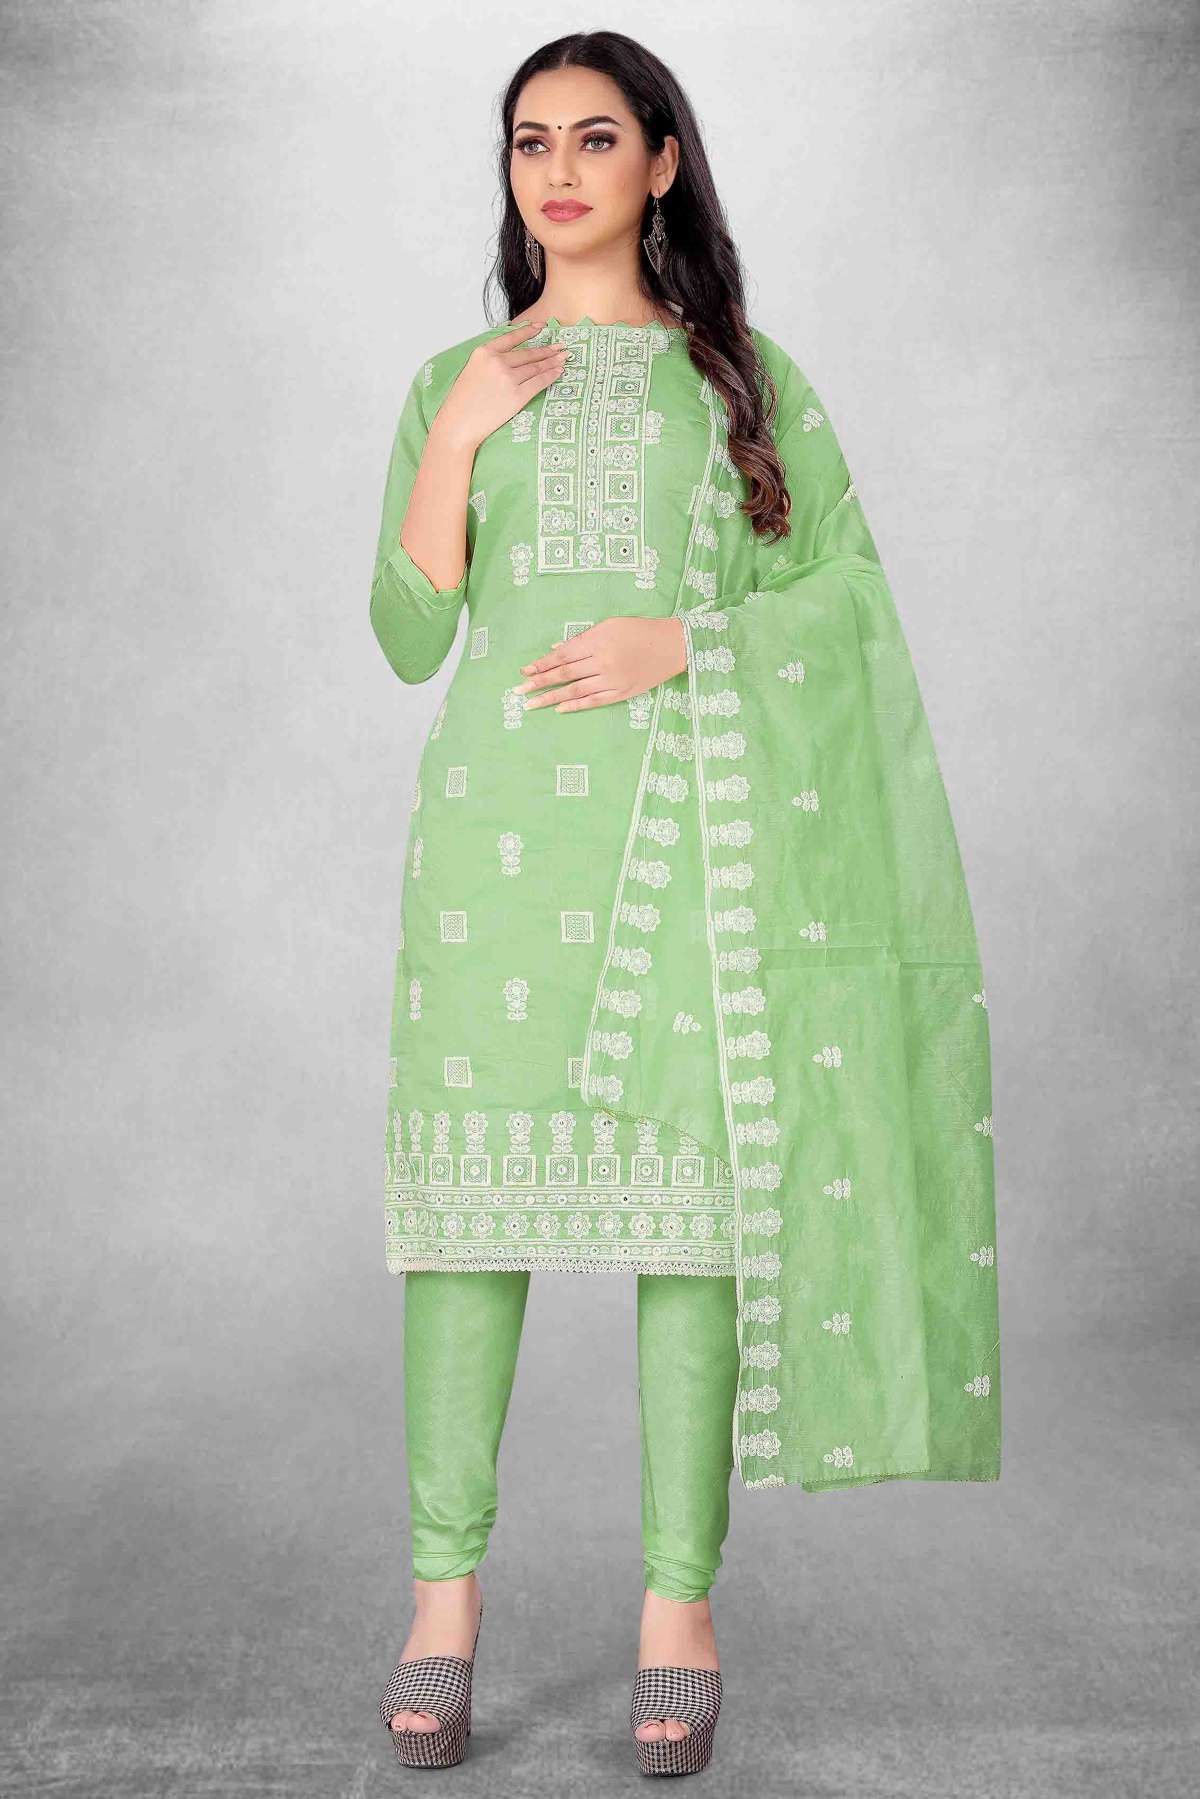 Unstitched Modal Cotton Embroidery Churidar Suit In Green Colour - US3234512